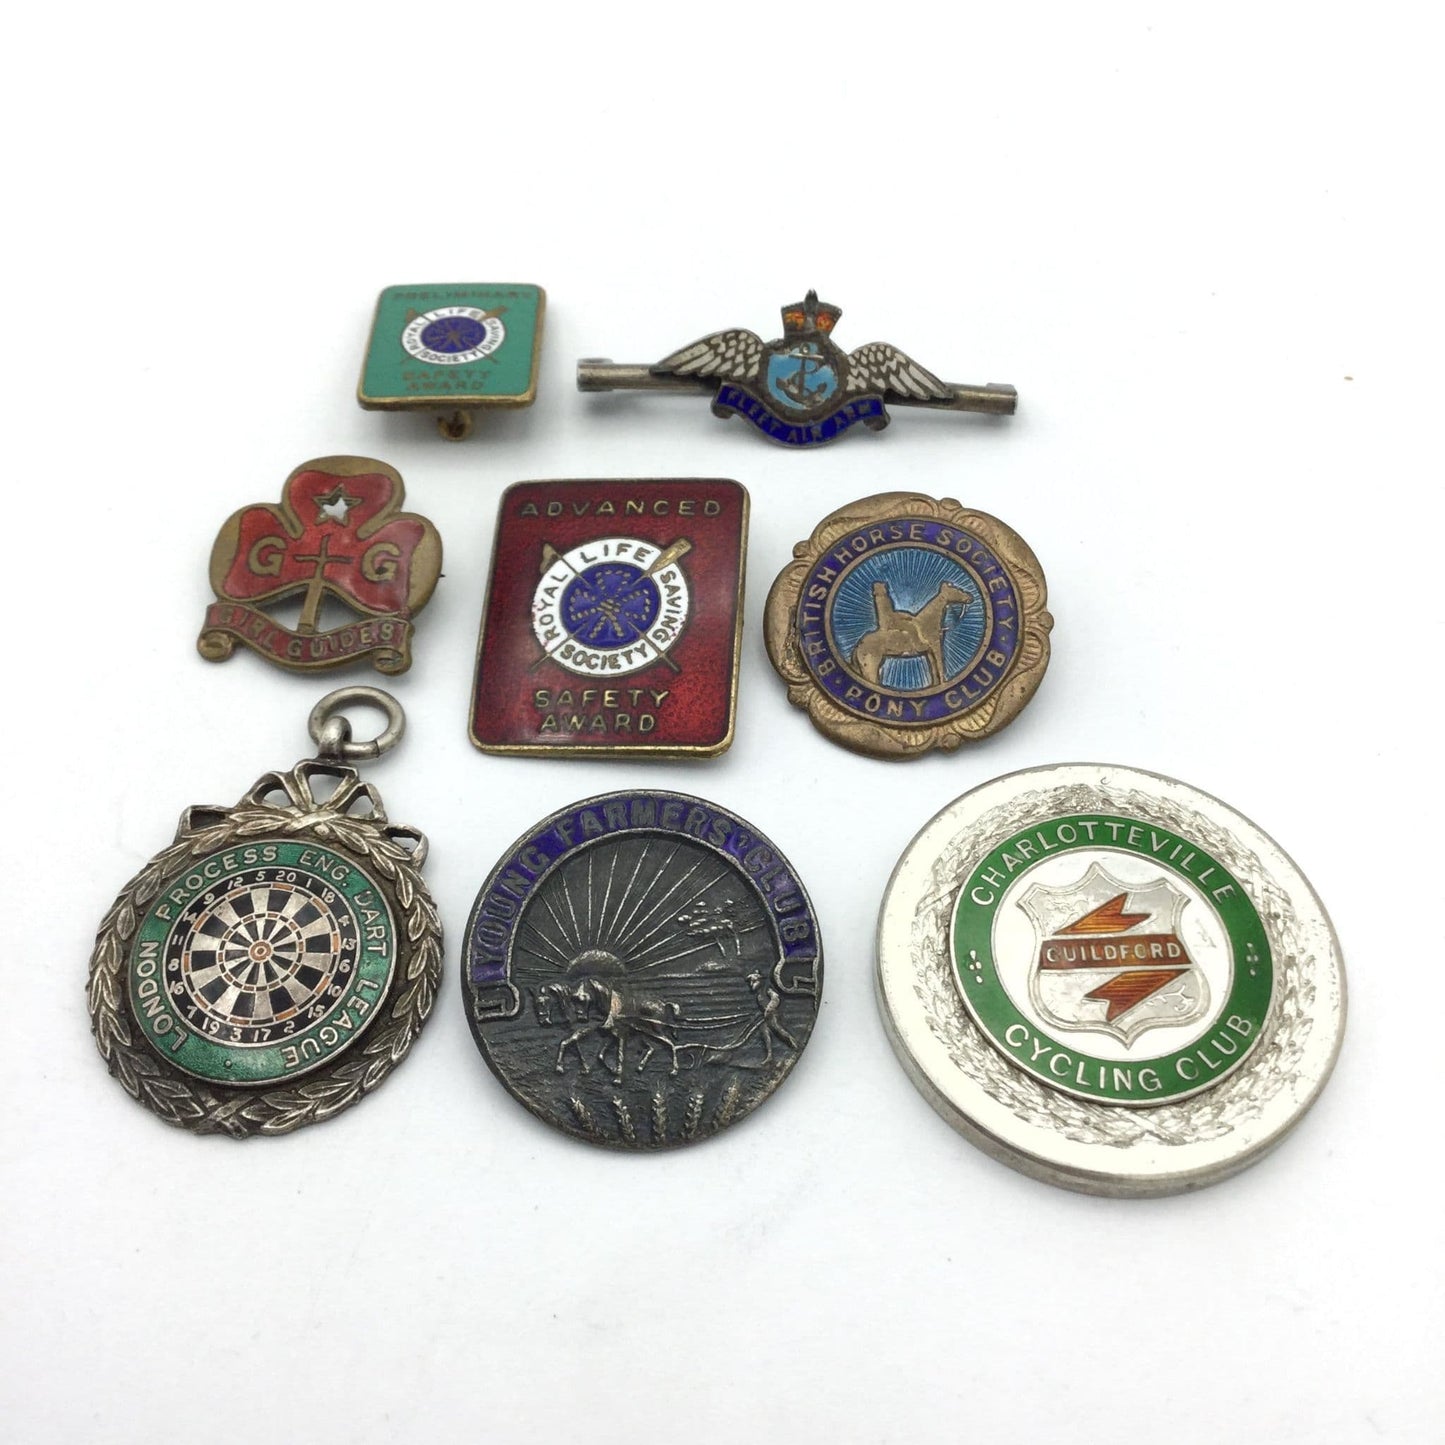 Vintage 1940s and 50s Badges and Medals Collection